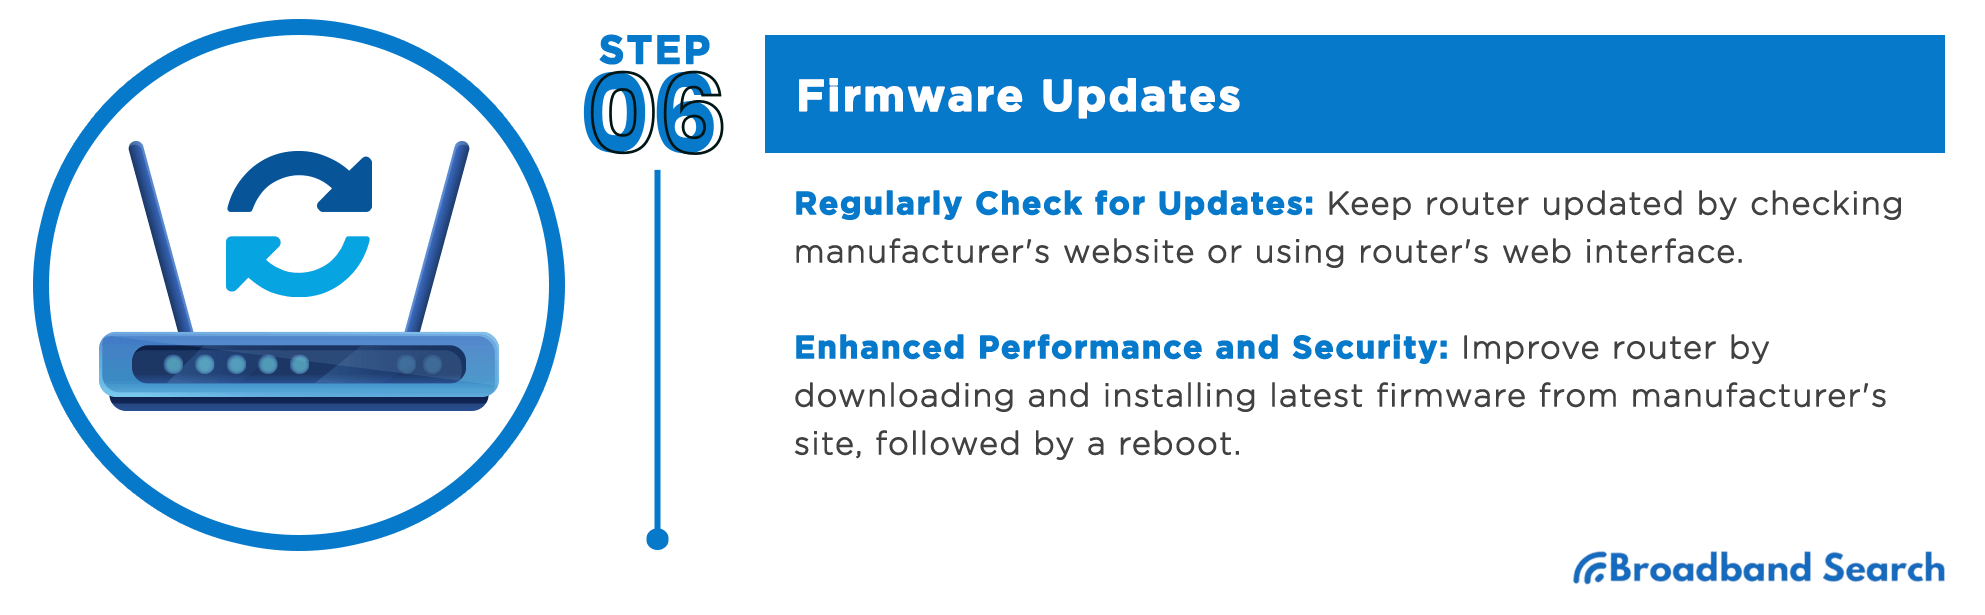 Tips on firmware updates to enhance security